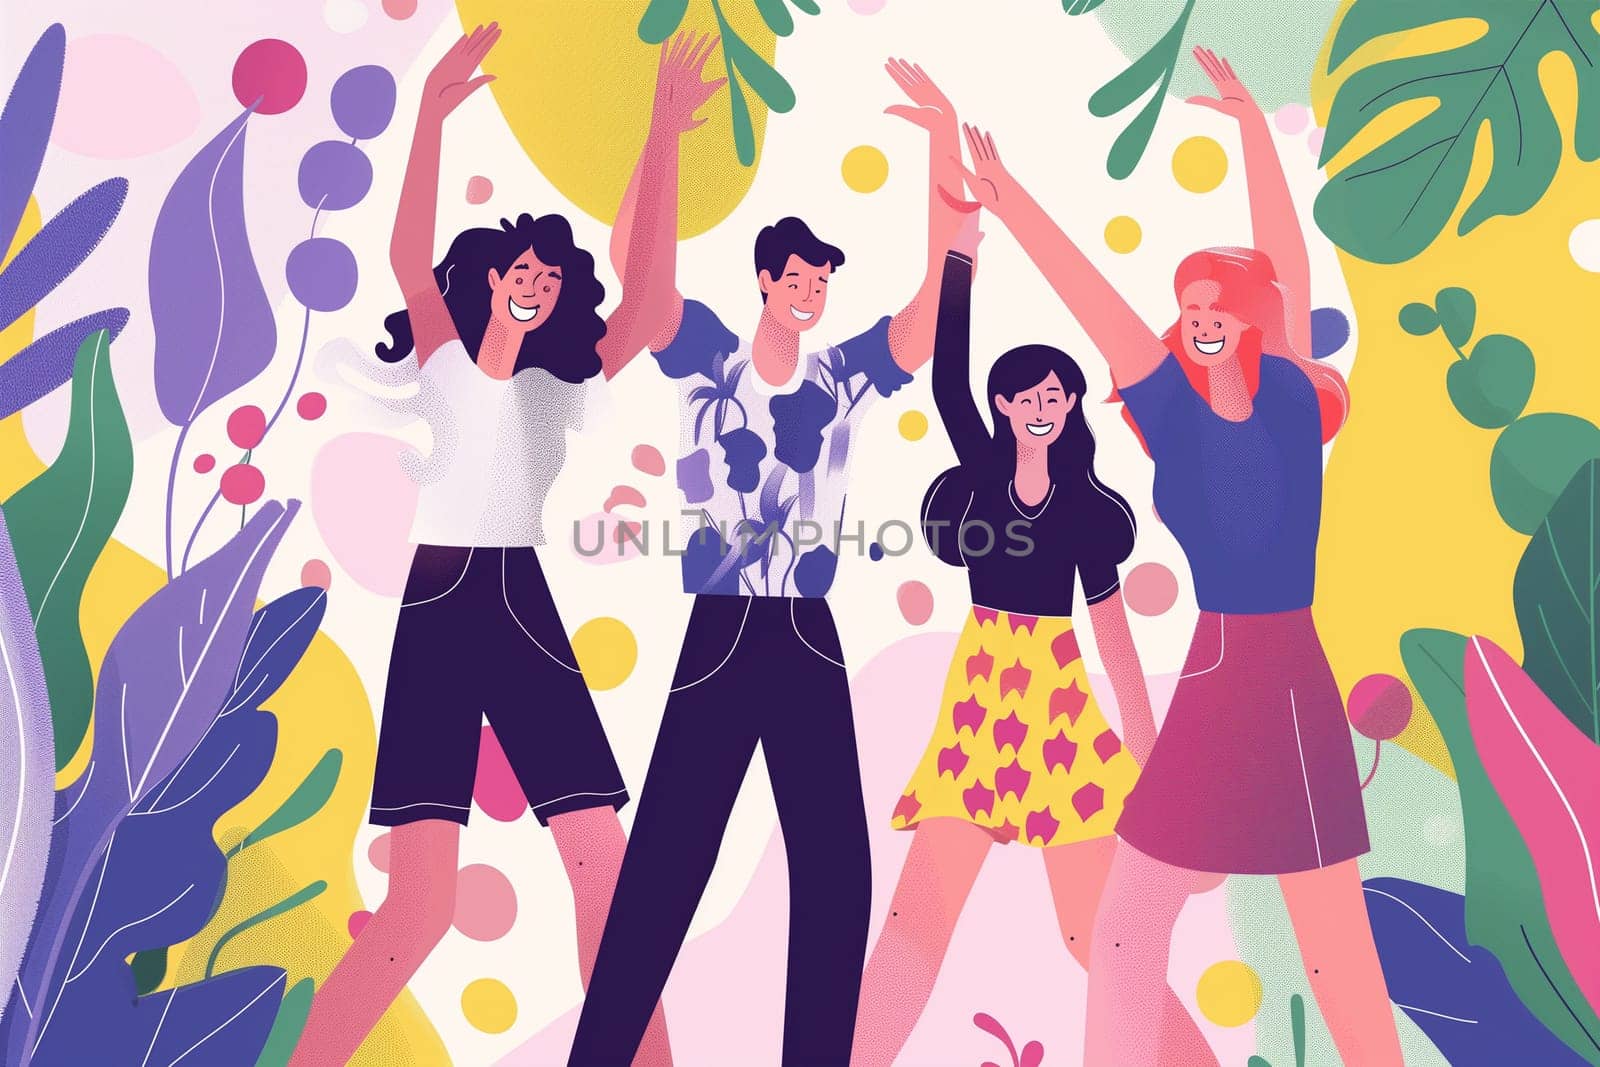 Group of People Dancing in Front of Colorful Background by Sd28DimoN_1976